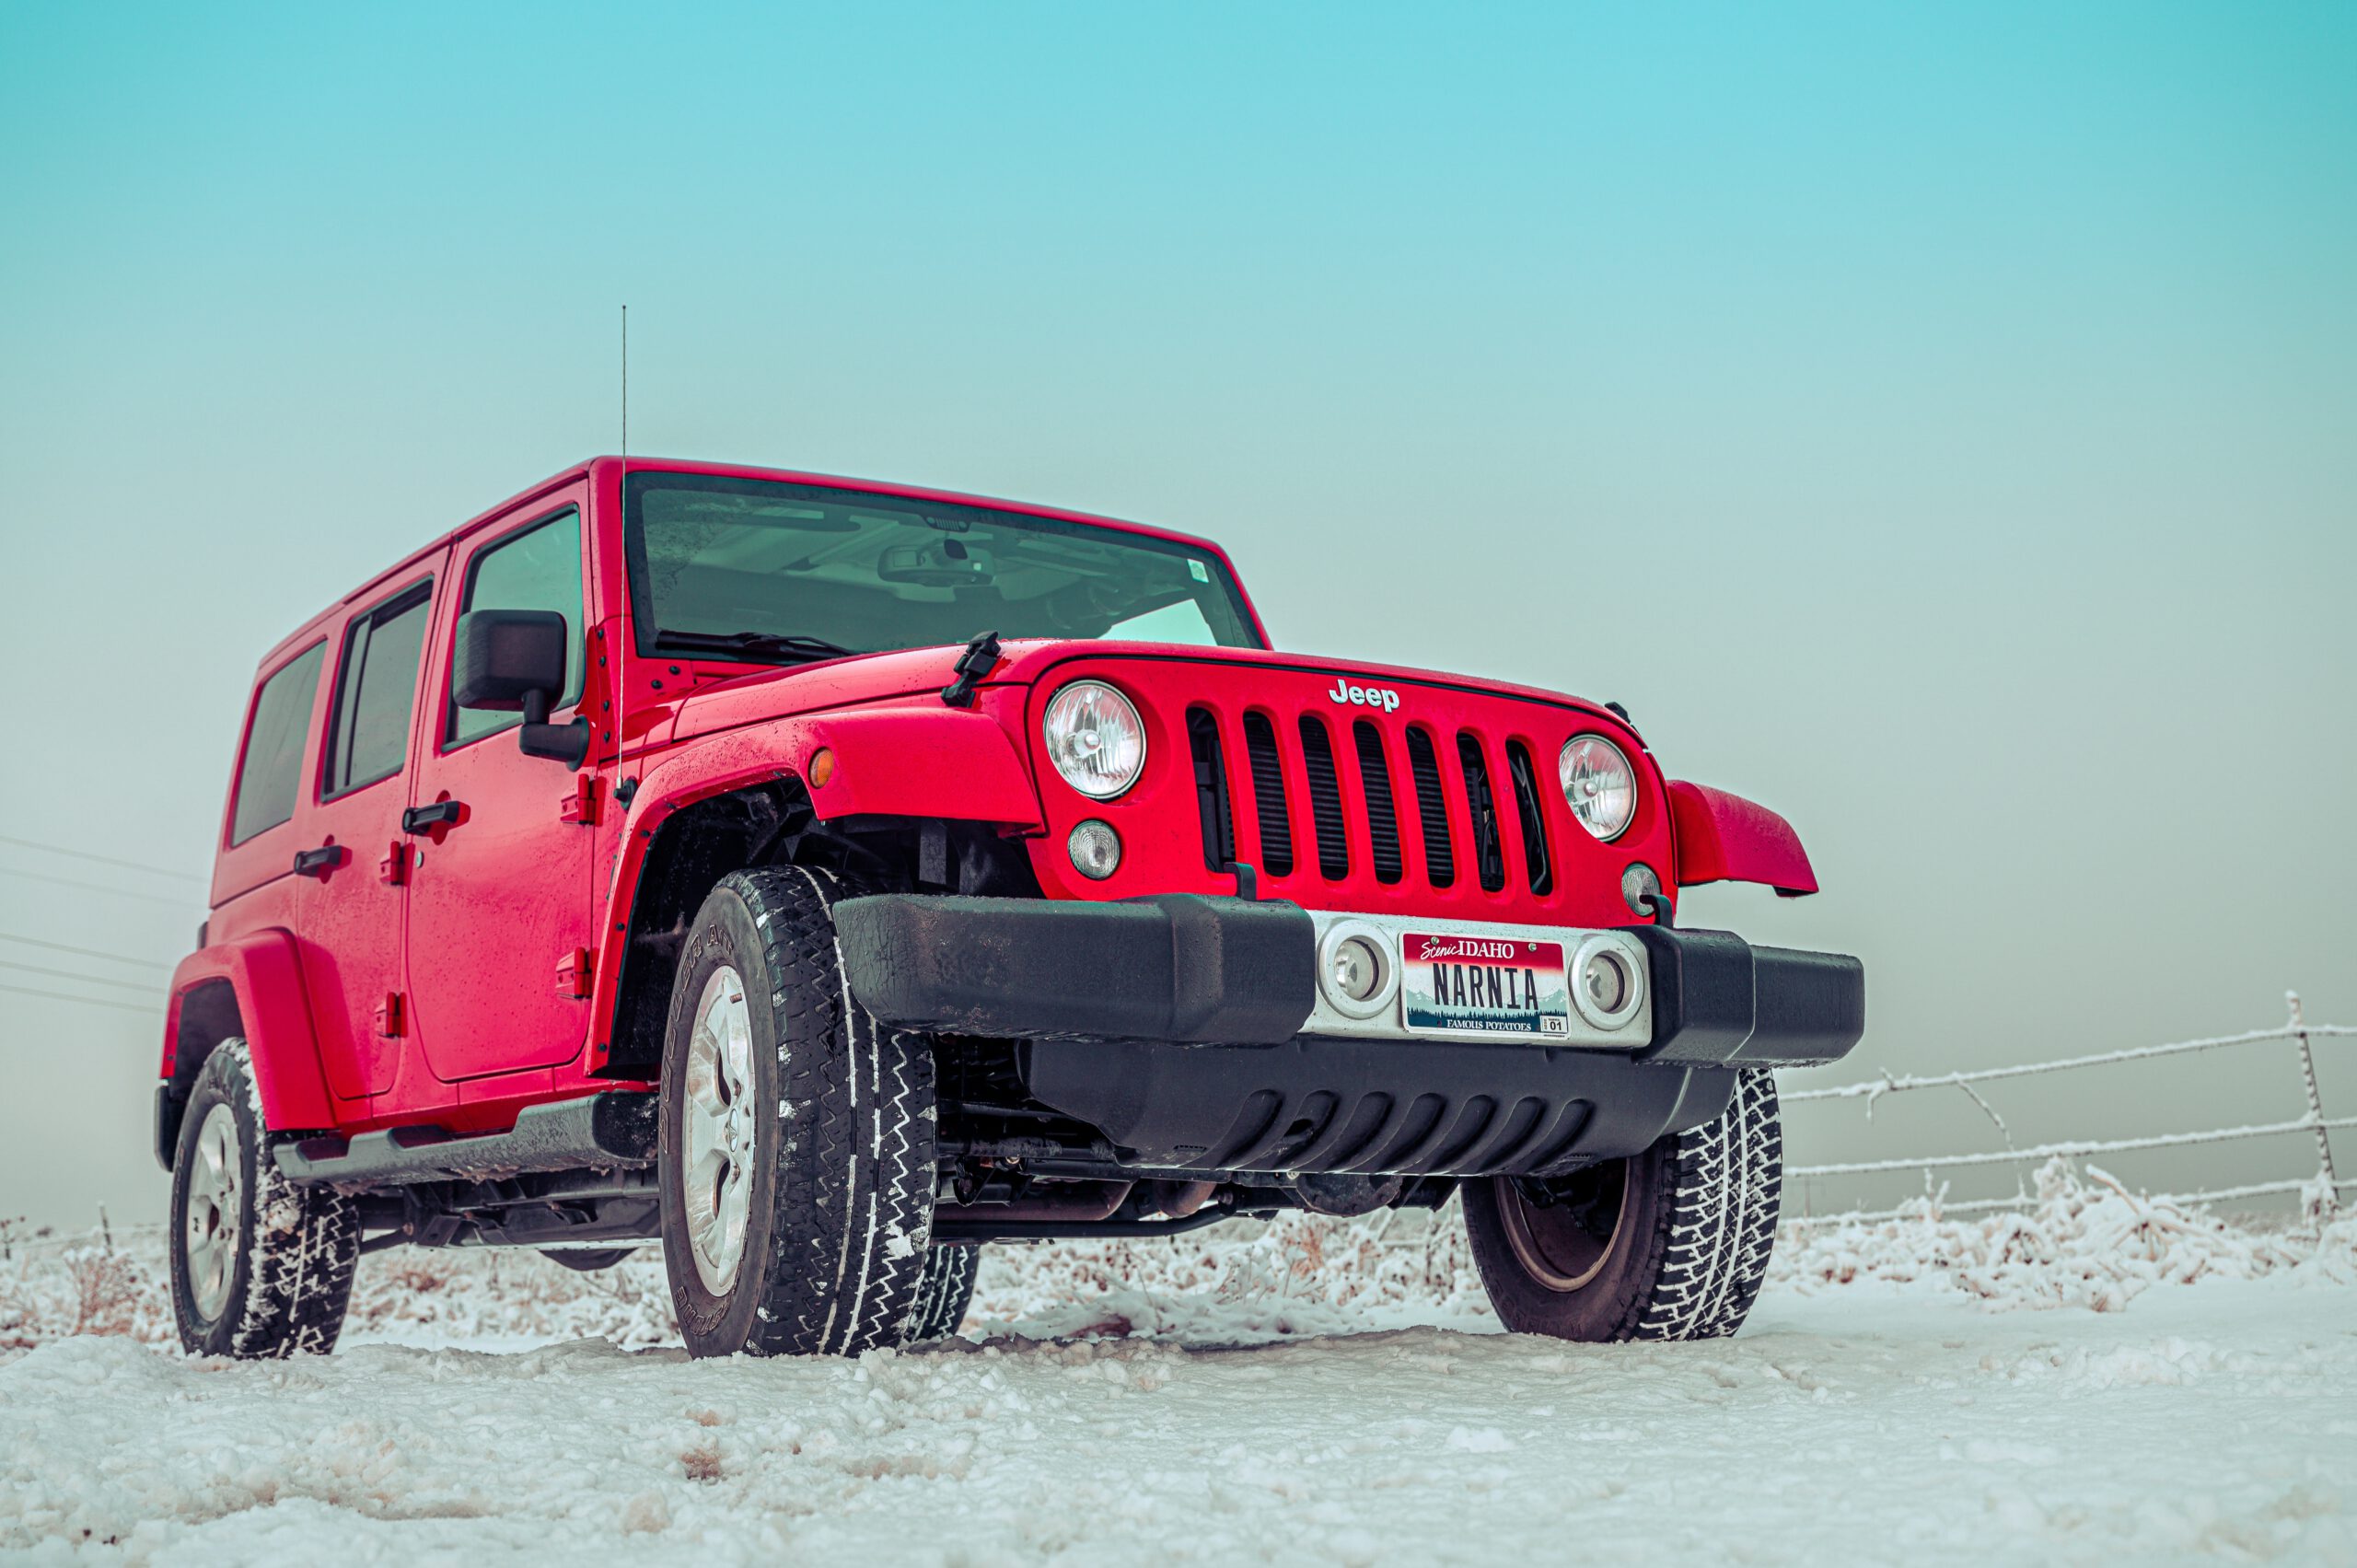 How to Select the Right Tires for Off Road Vehicles